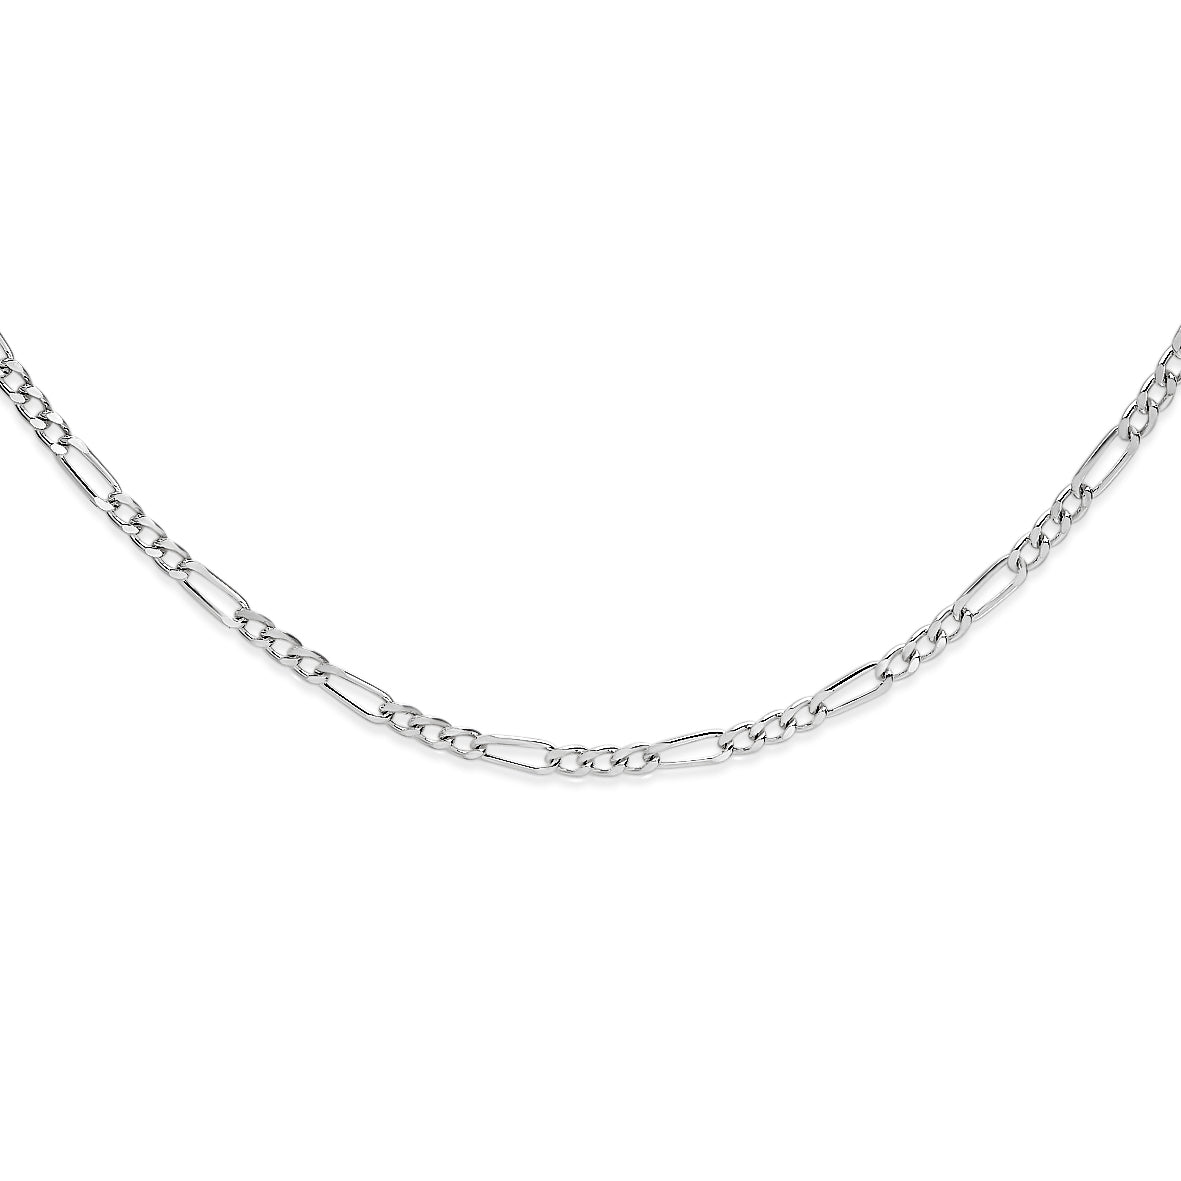 Sterling silver 1:3 figaro link chain